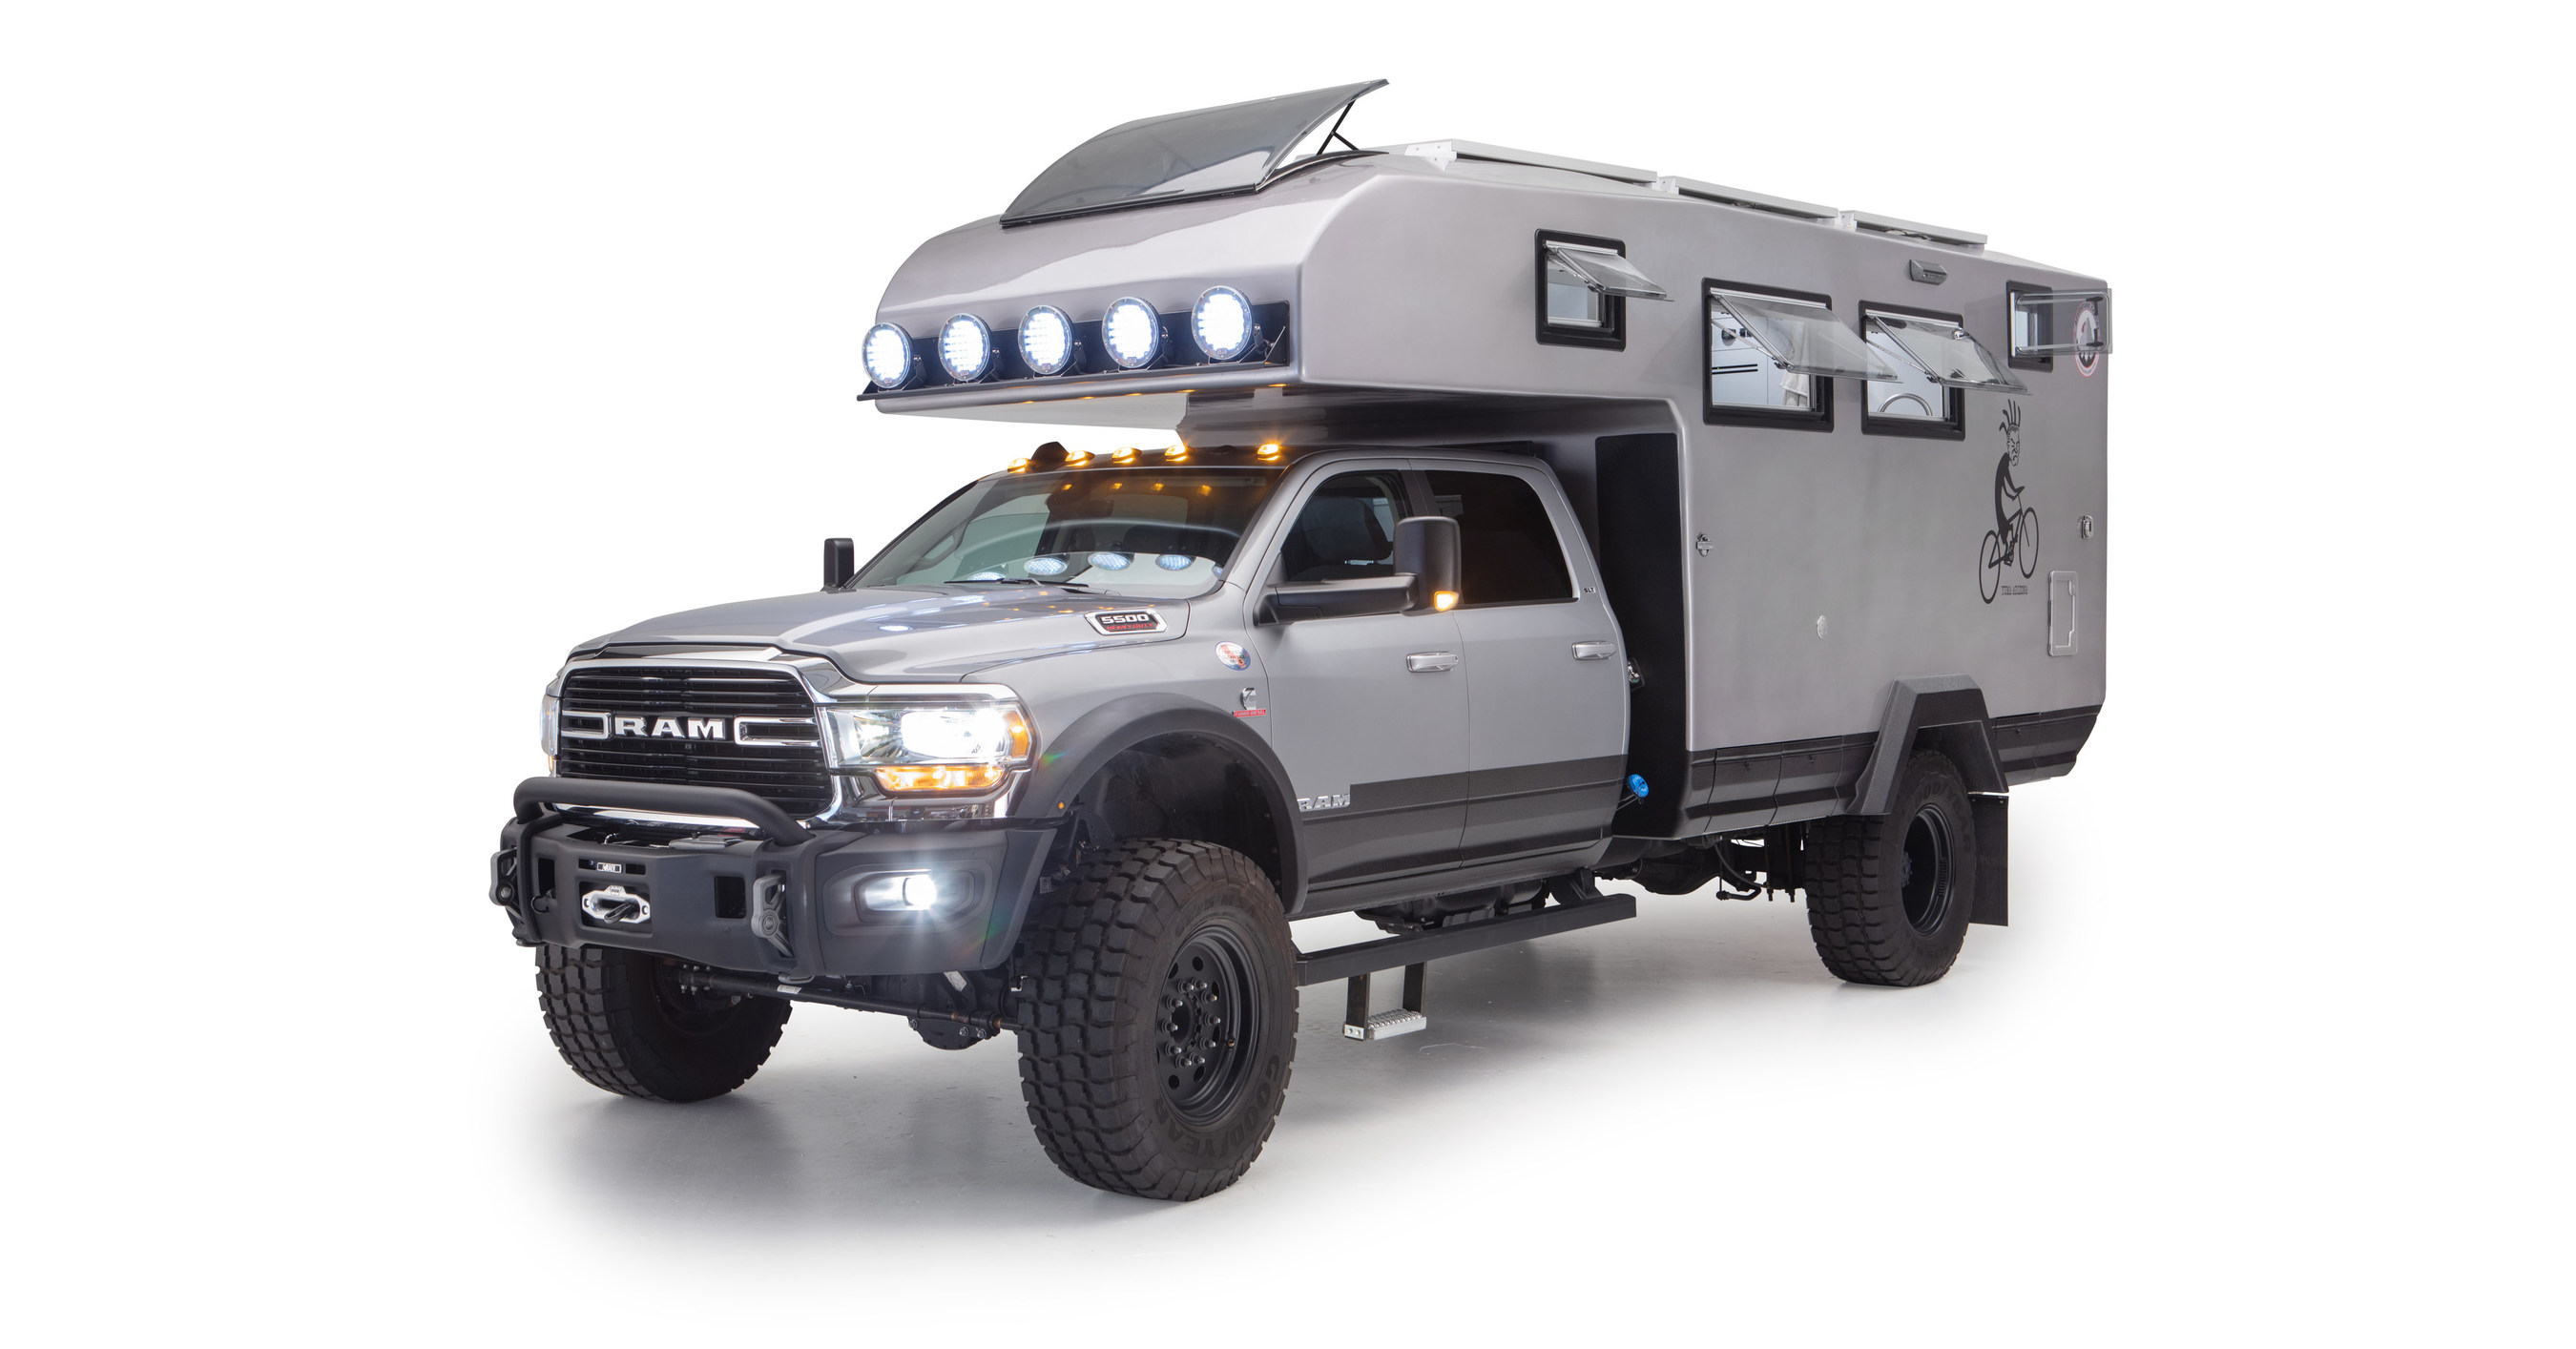 Storyteller Overland goes global with purchase of industry-leading ...